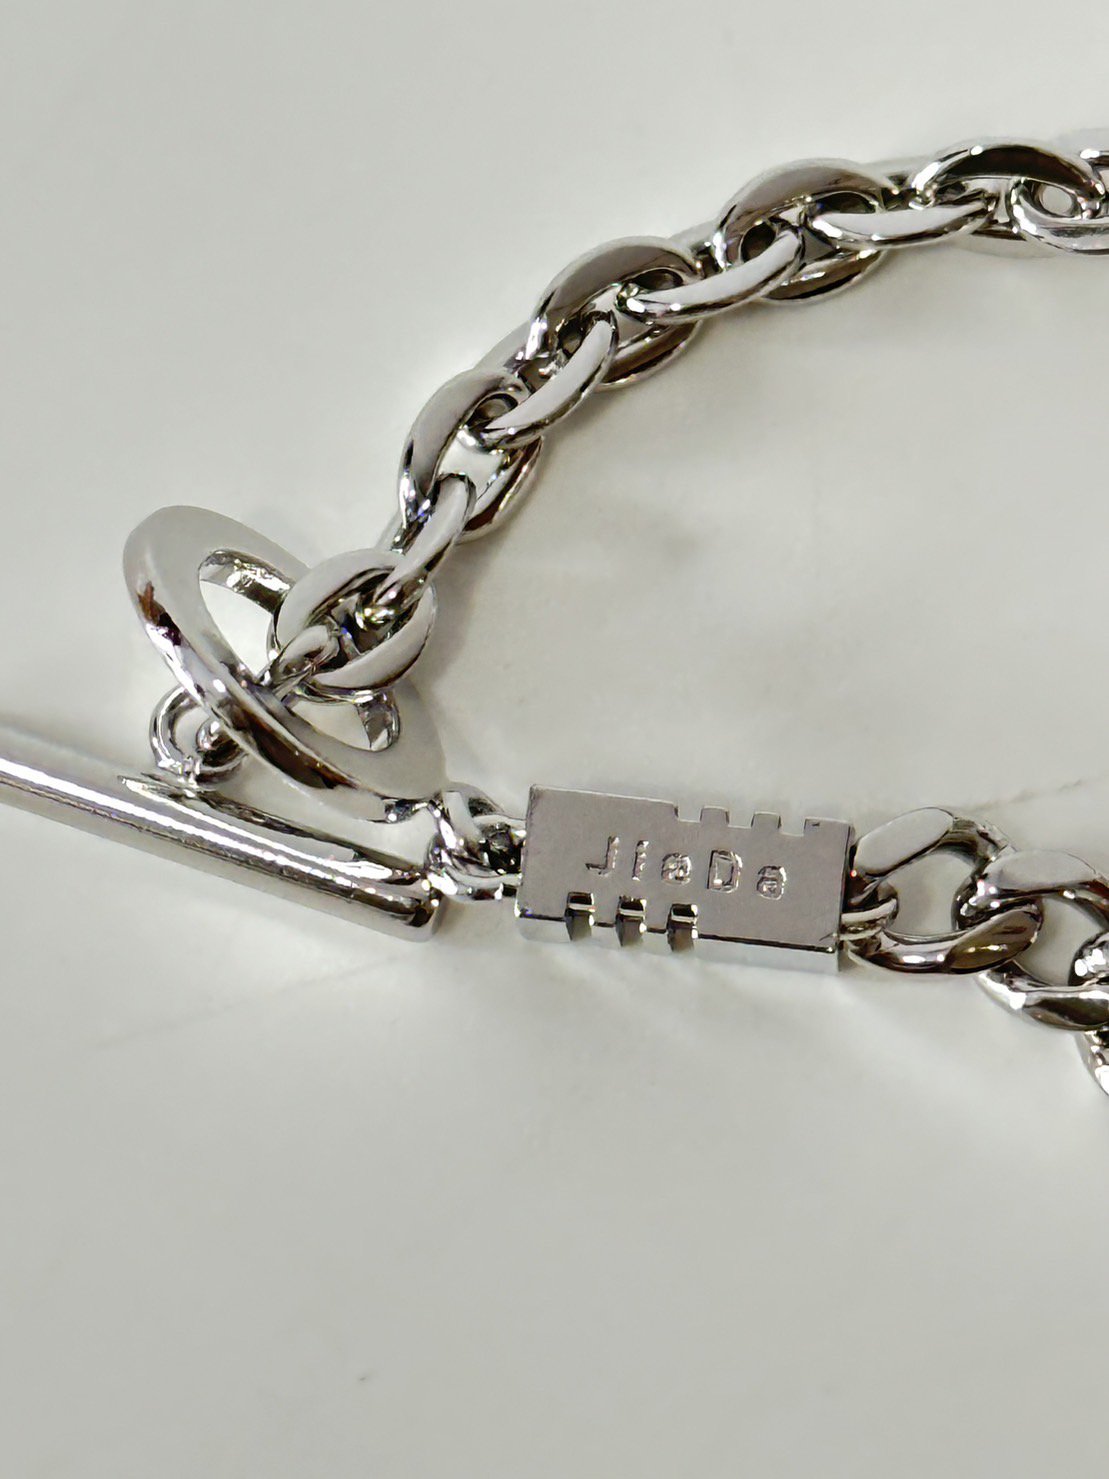 JieDa<br />SWITCHING BRACELET / SILVER<img class='new_mark_img2' src='https://img.shop-pro.jp/img/new/icons14.gif' style='border:none;display:inline;margin:0px;padding:0px;width:auto;' />